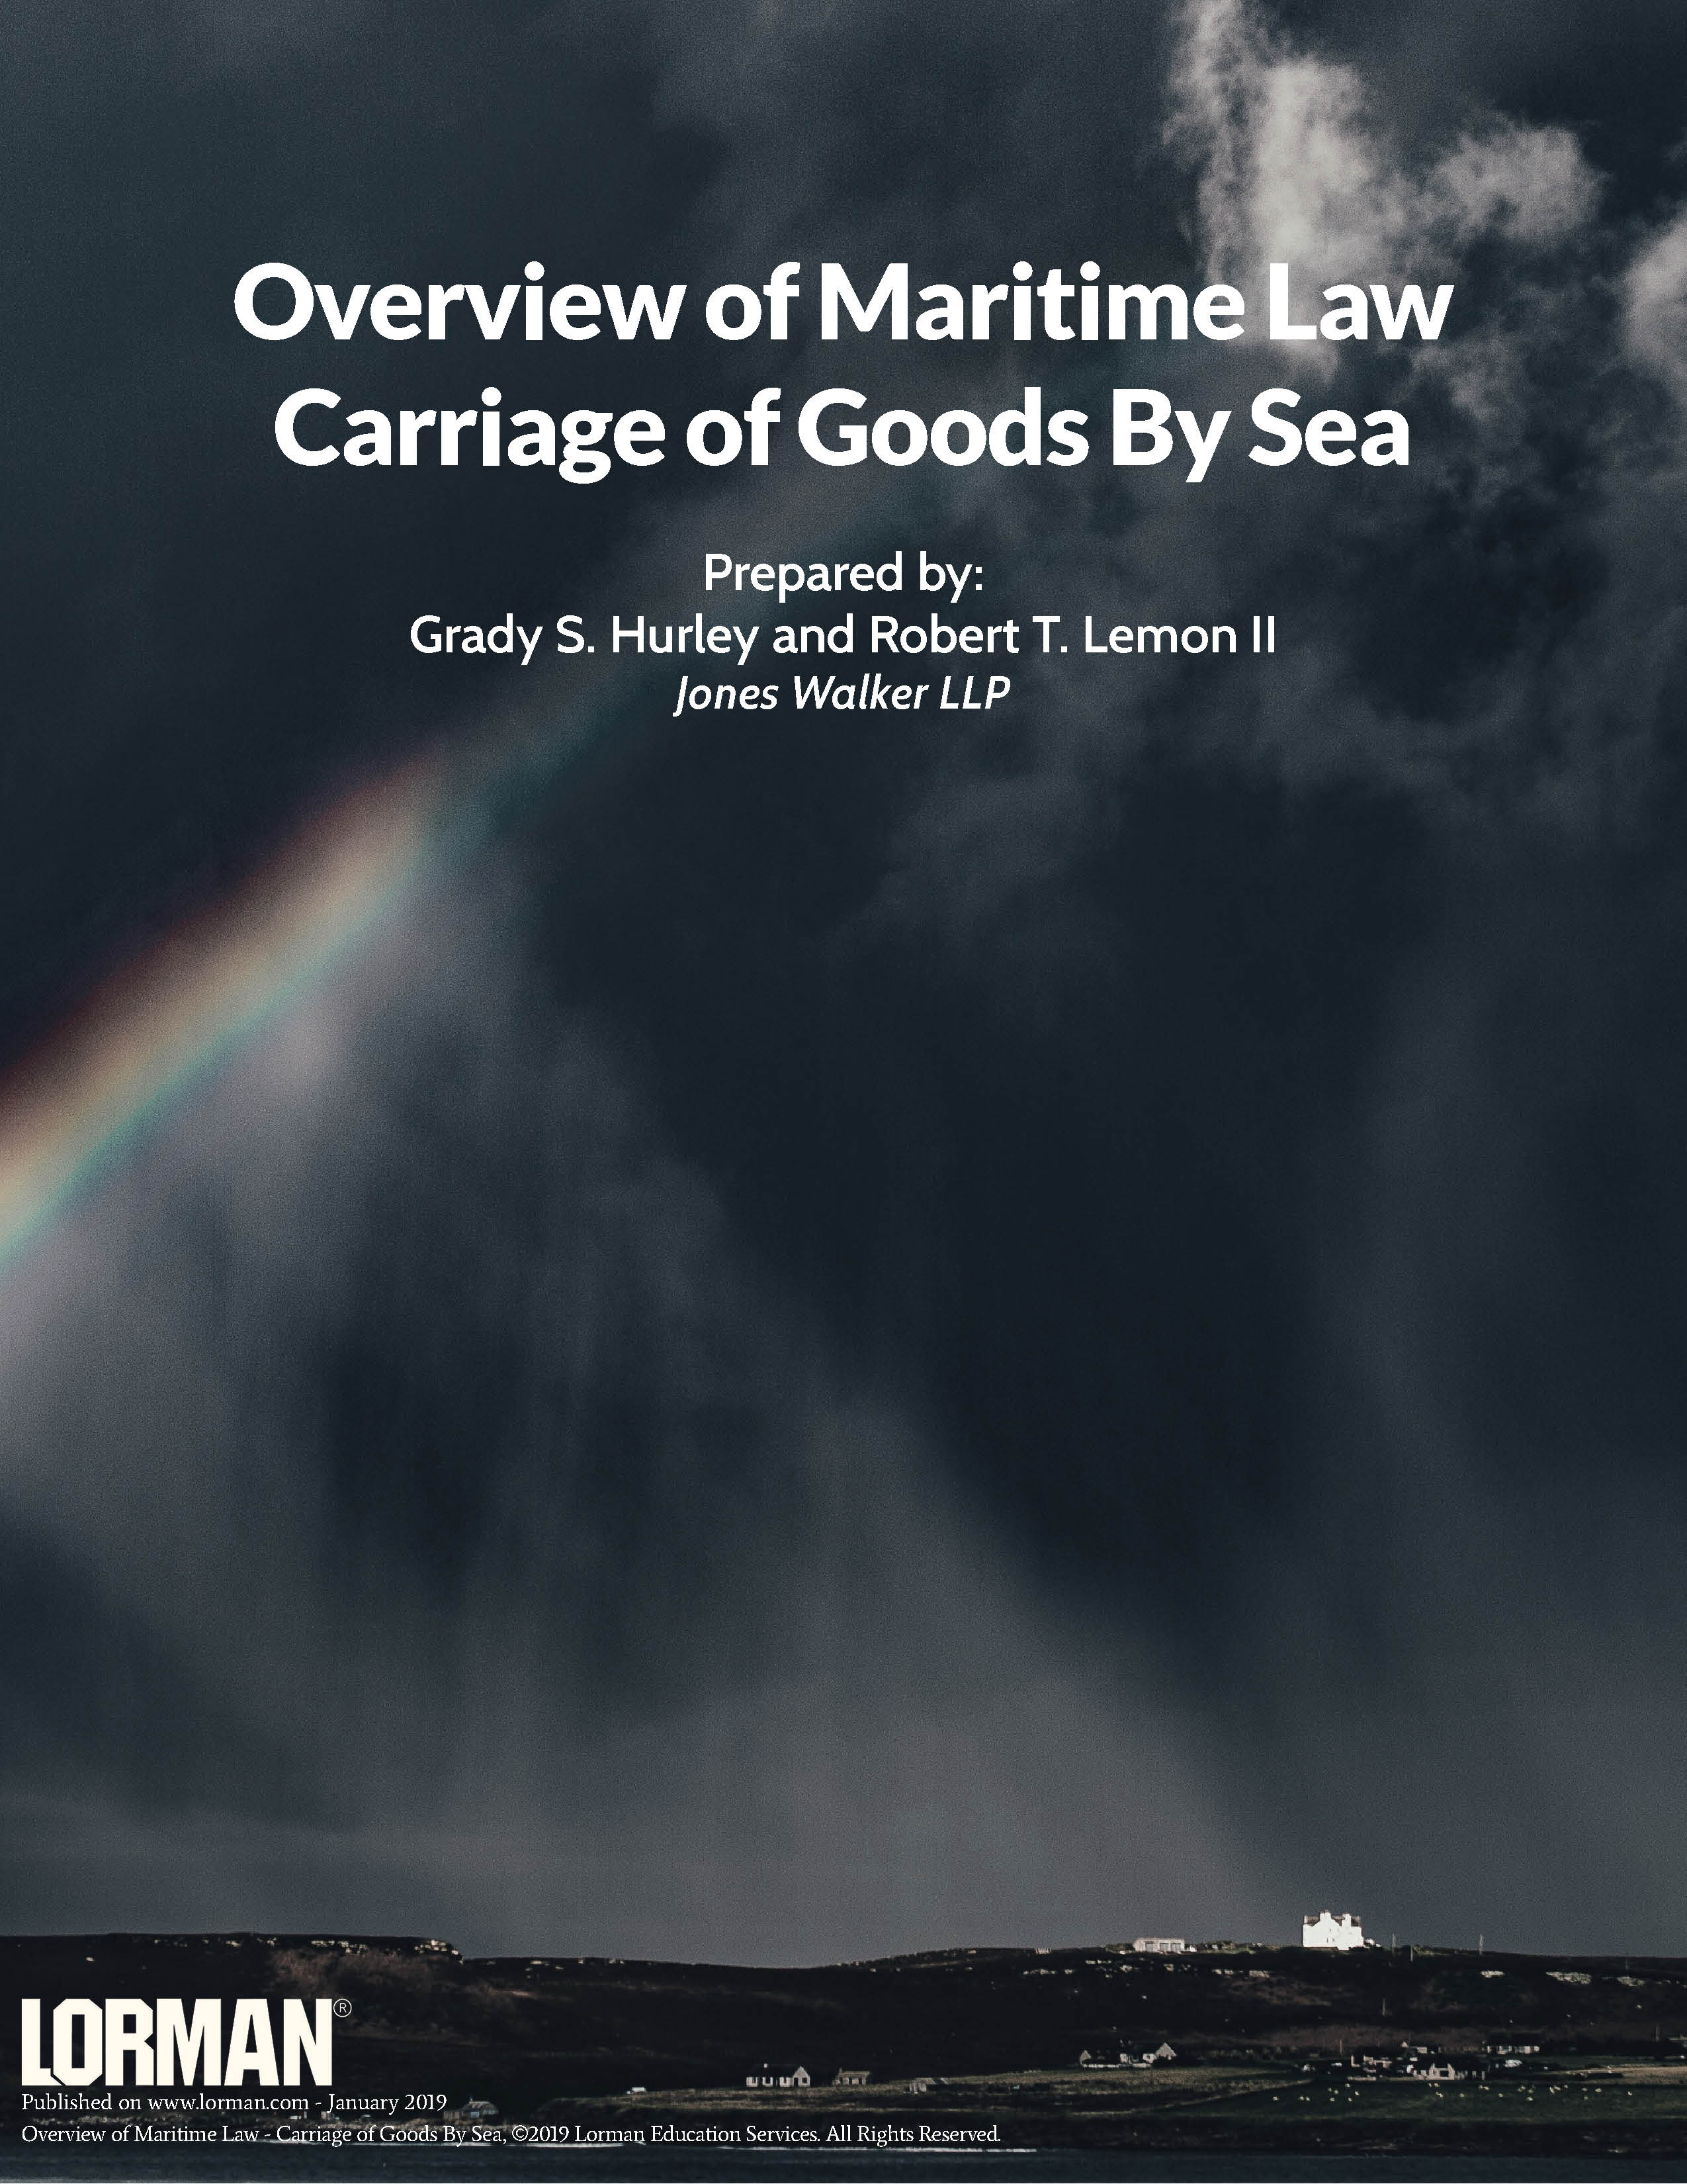 Overview of Maritime Law - Carriage of Goods By Sea